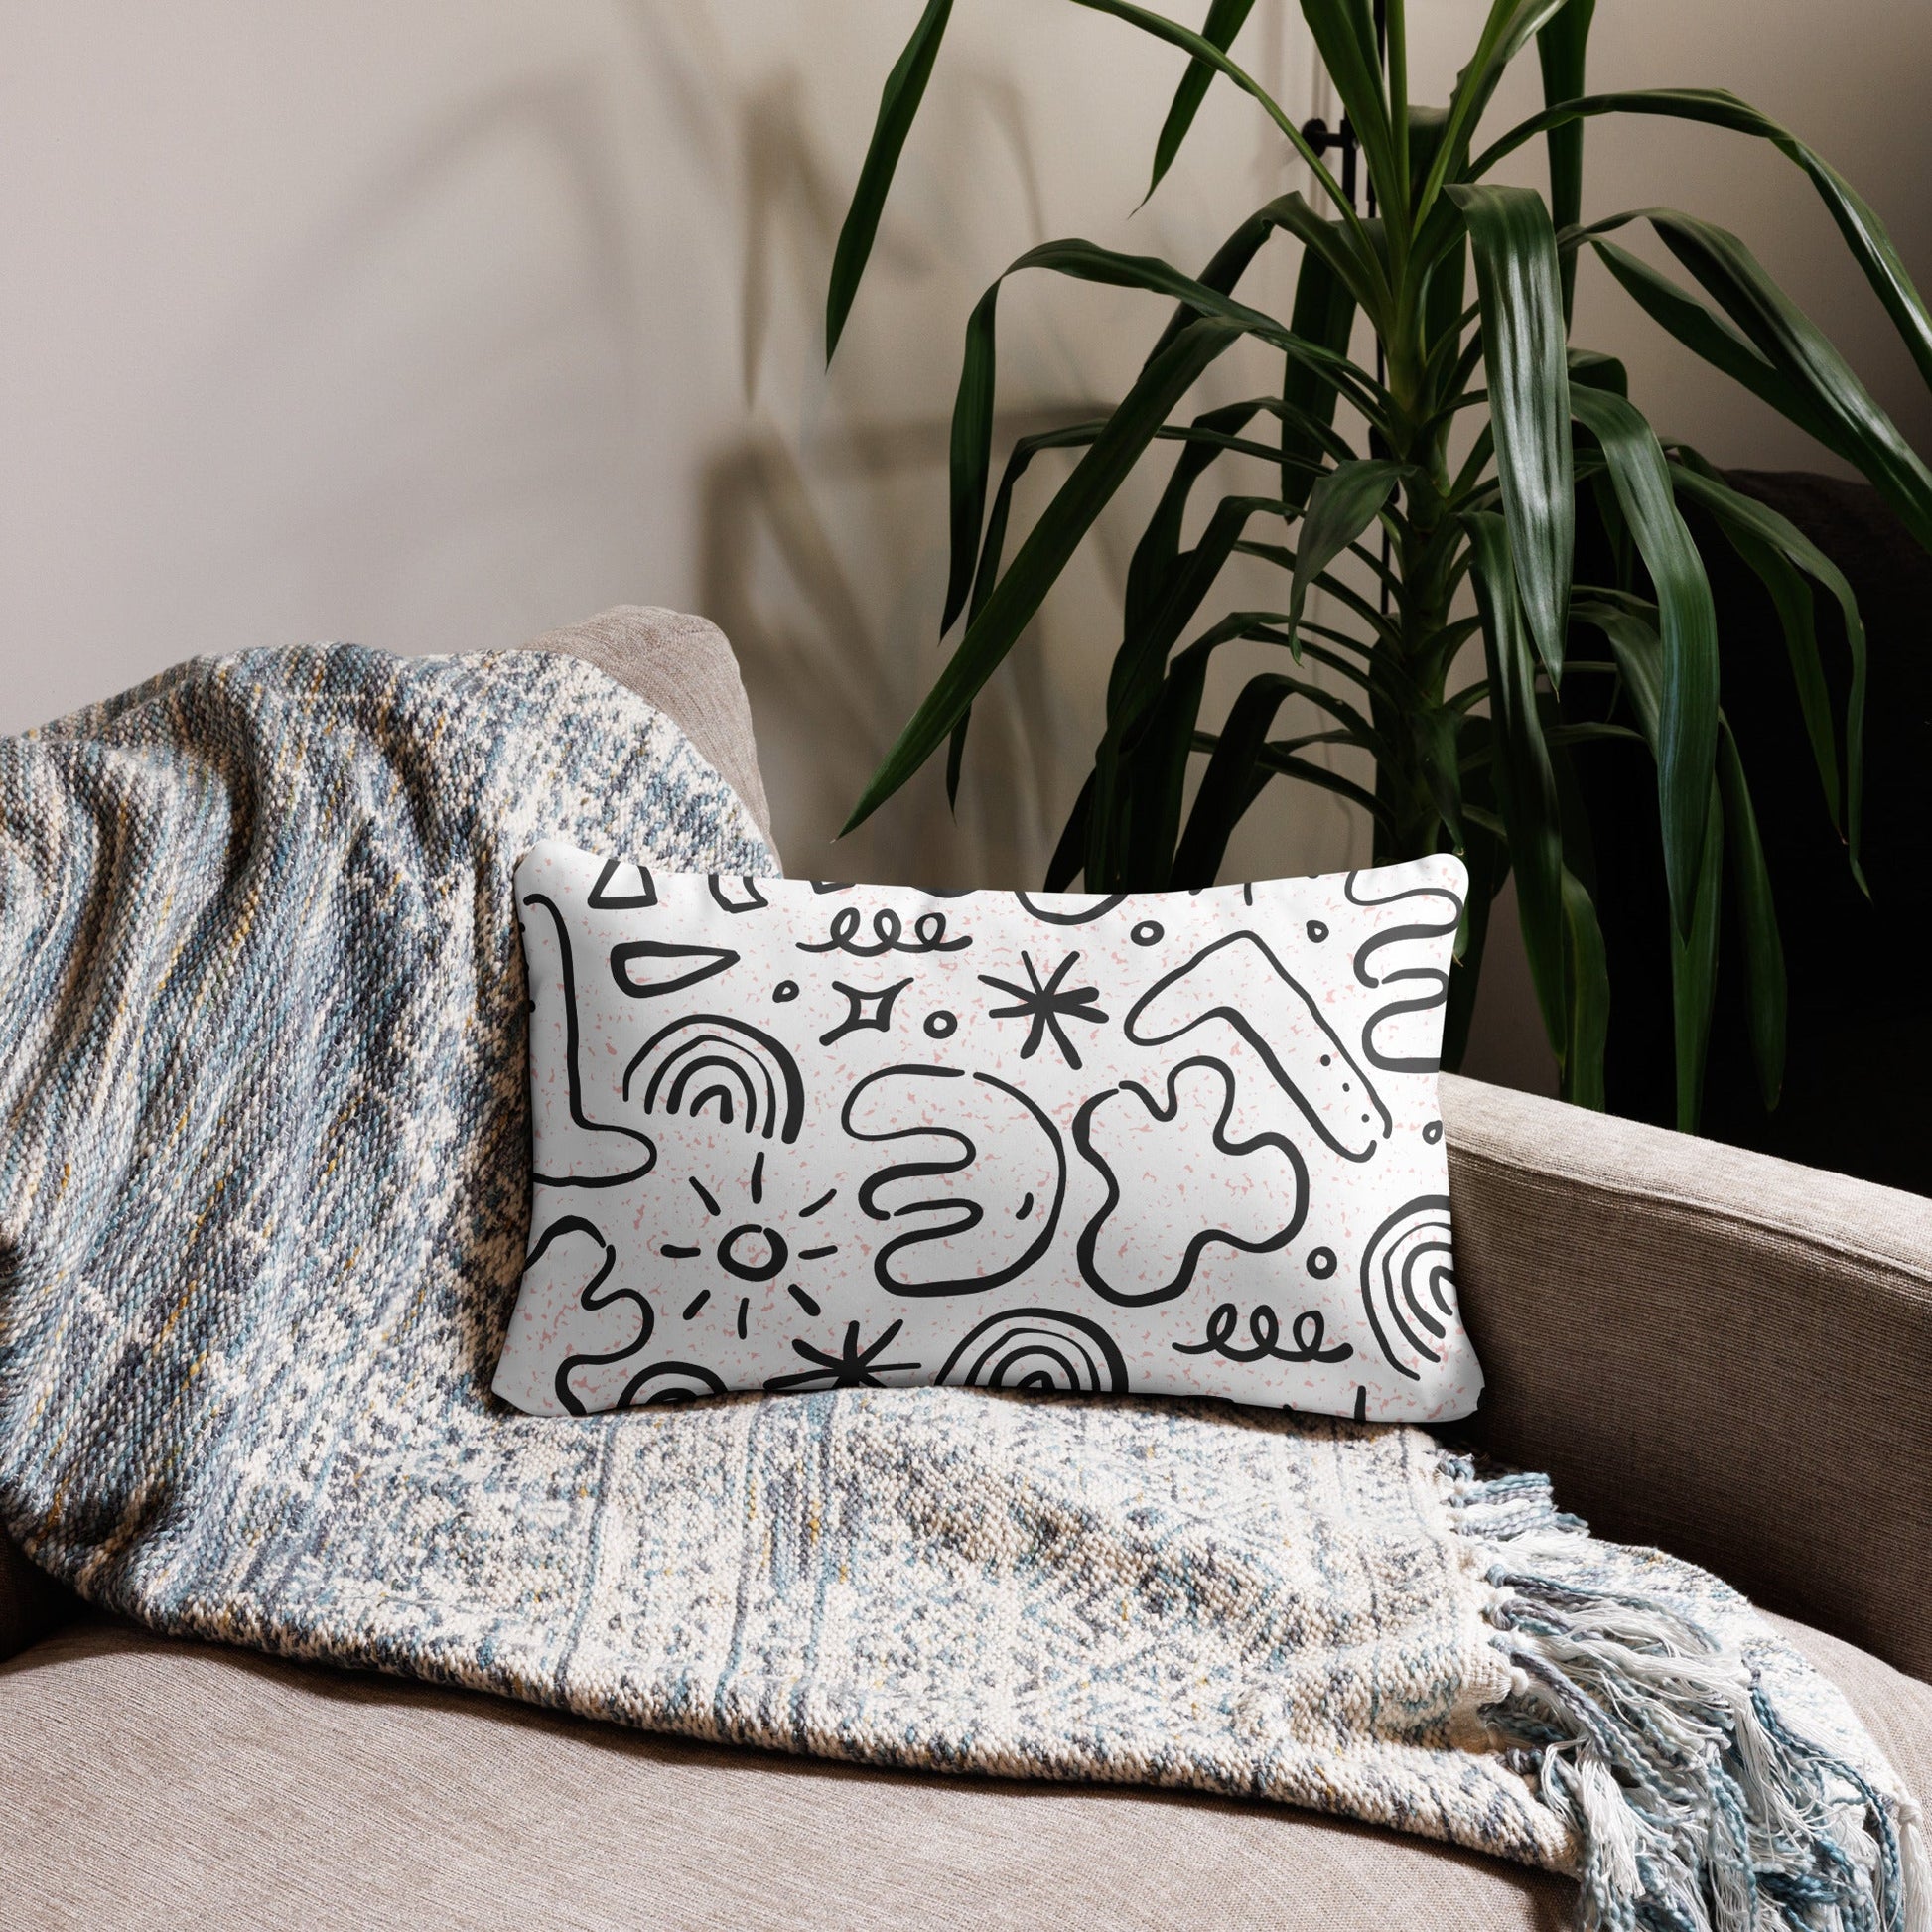 Doodle Art Pillow - Creative and Comfortable Home Decor Accent